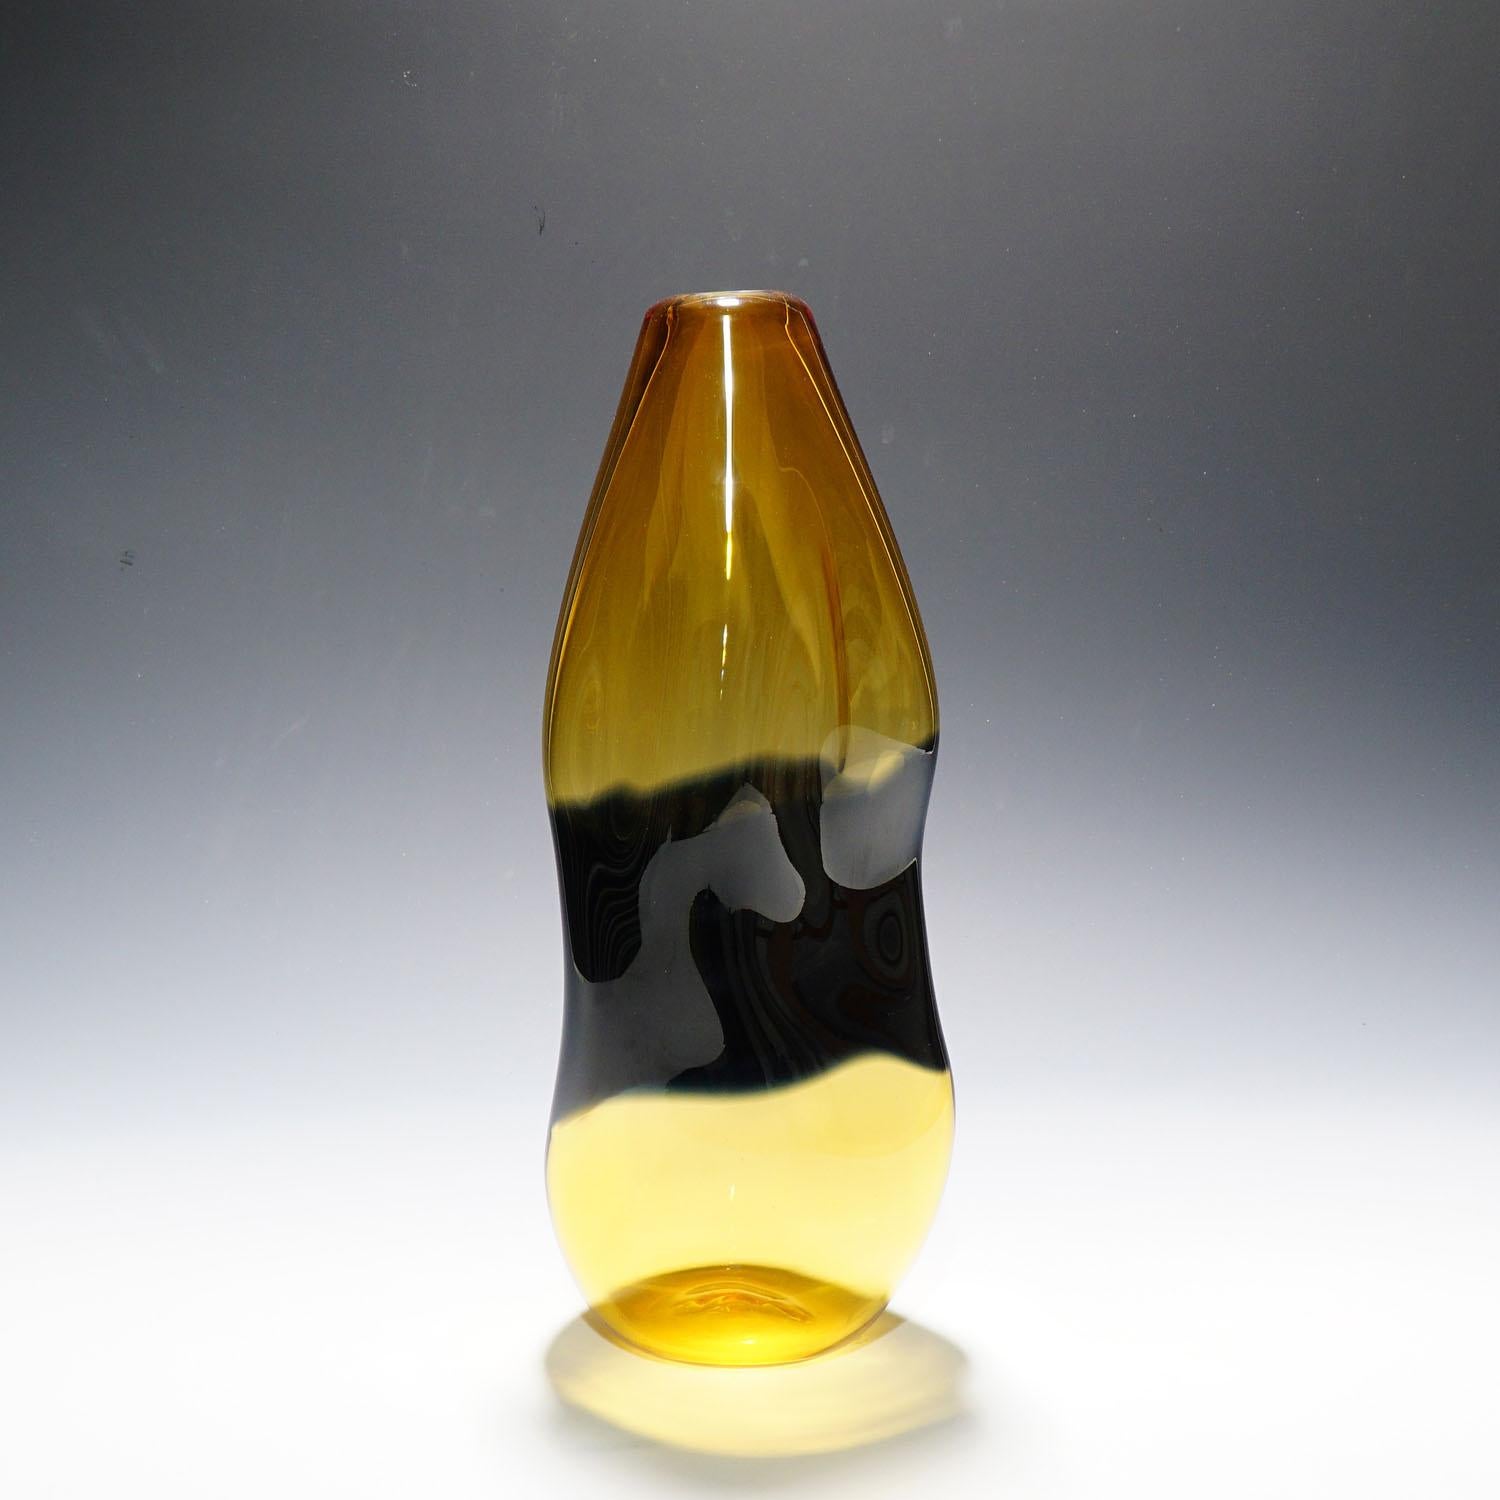 A large and decorative murano glass vase of the 'Fiapi' series designed by Carlo Nason and manufactured by V. Nason & C. Murano end of the 20th century. Amber and black glass fused in incalmo technicue and asymetrical shaped. Lable of the